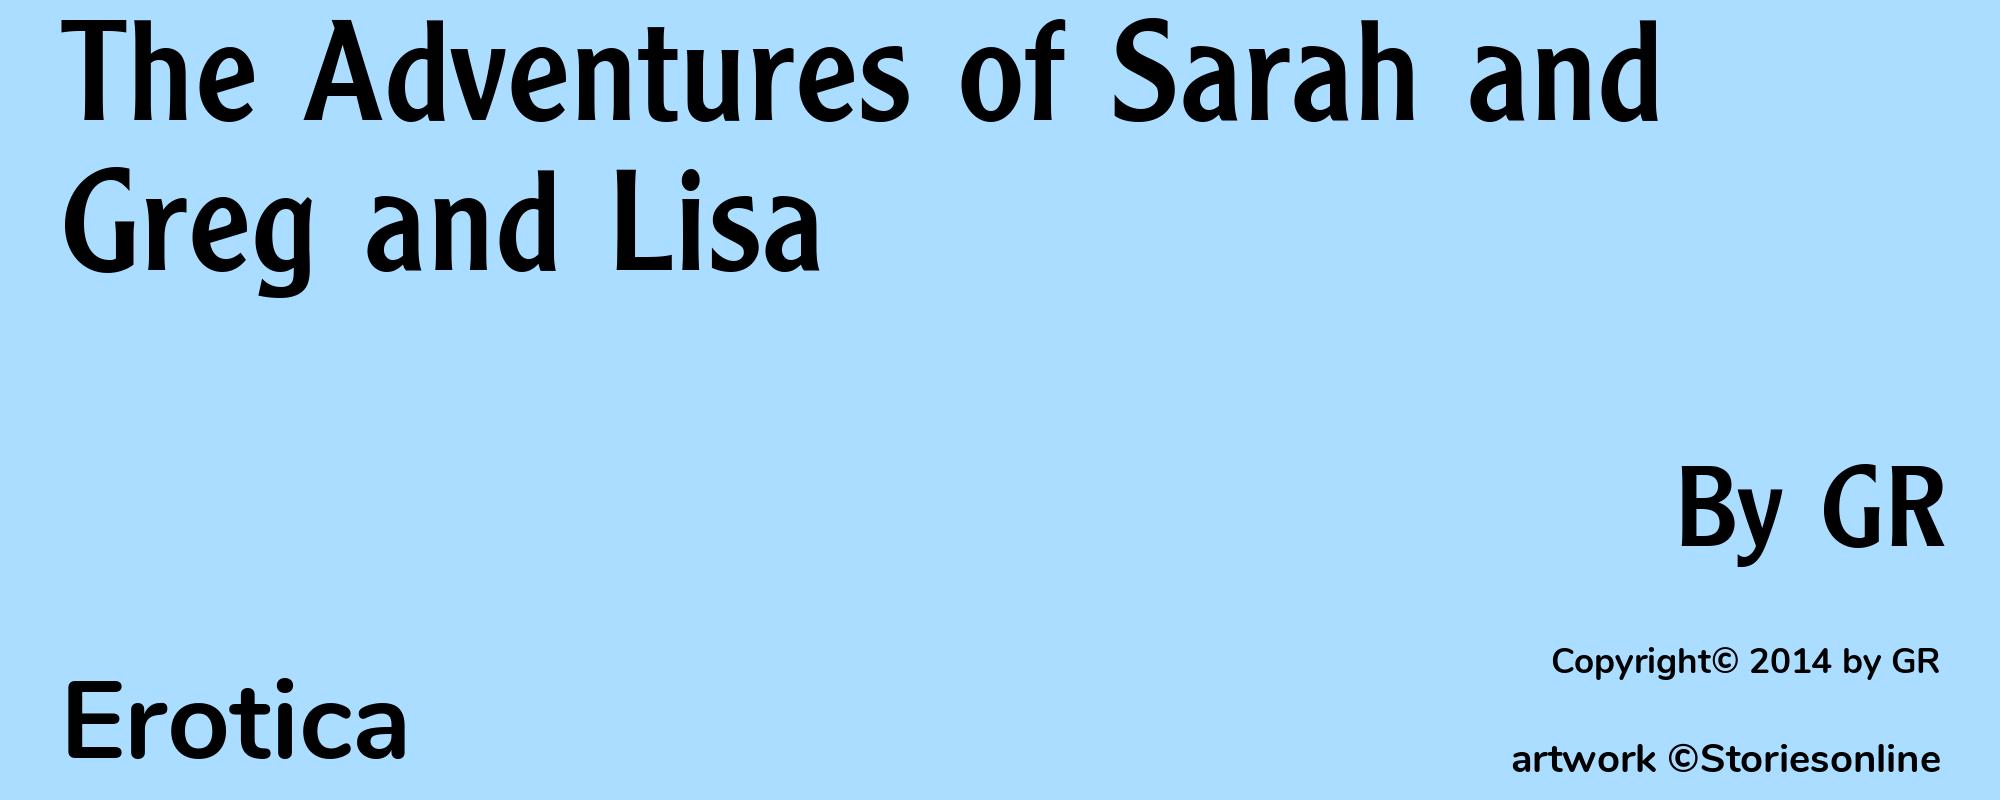 The Adventures of Sarah and Greg and Lisa - Cover